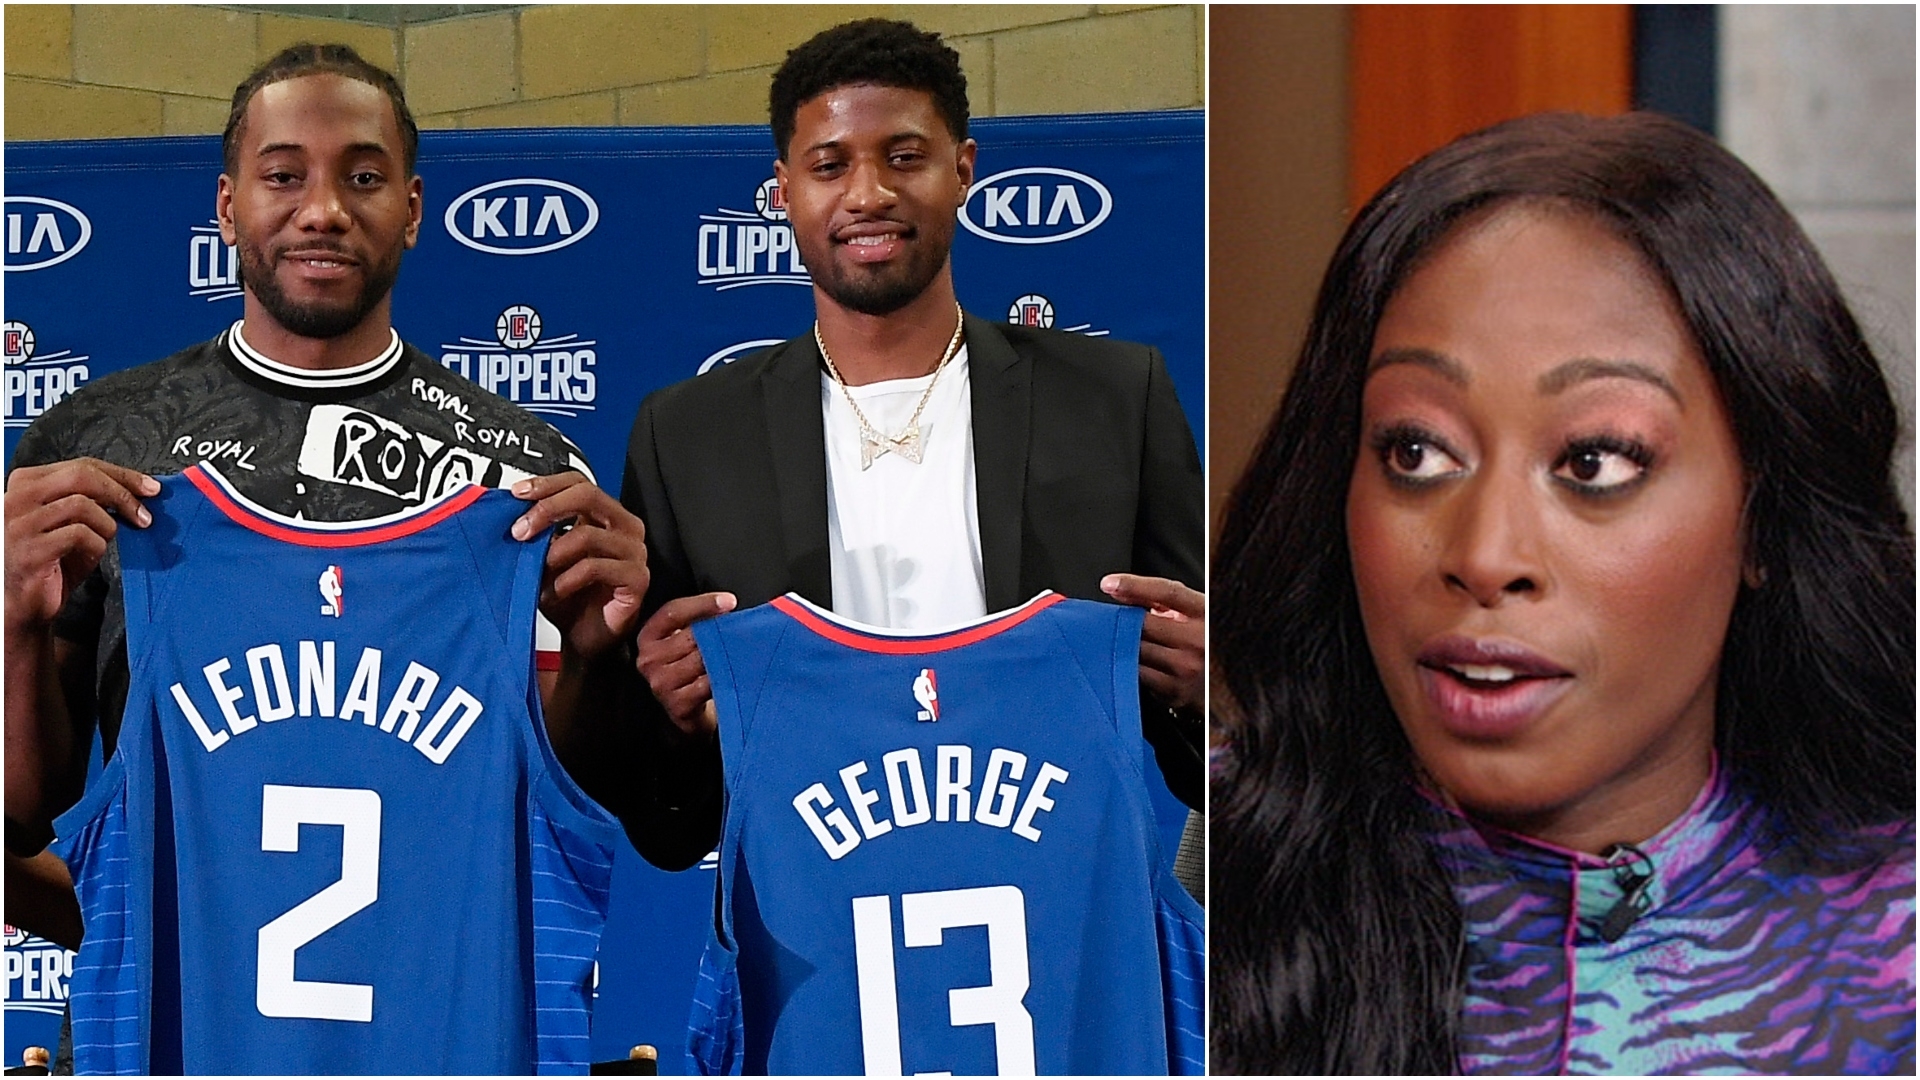 Ogwumike Kawhi, PG-13 the best two-way duo in the NBA - Stream the Video